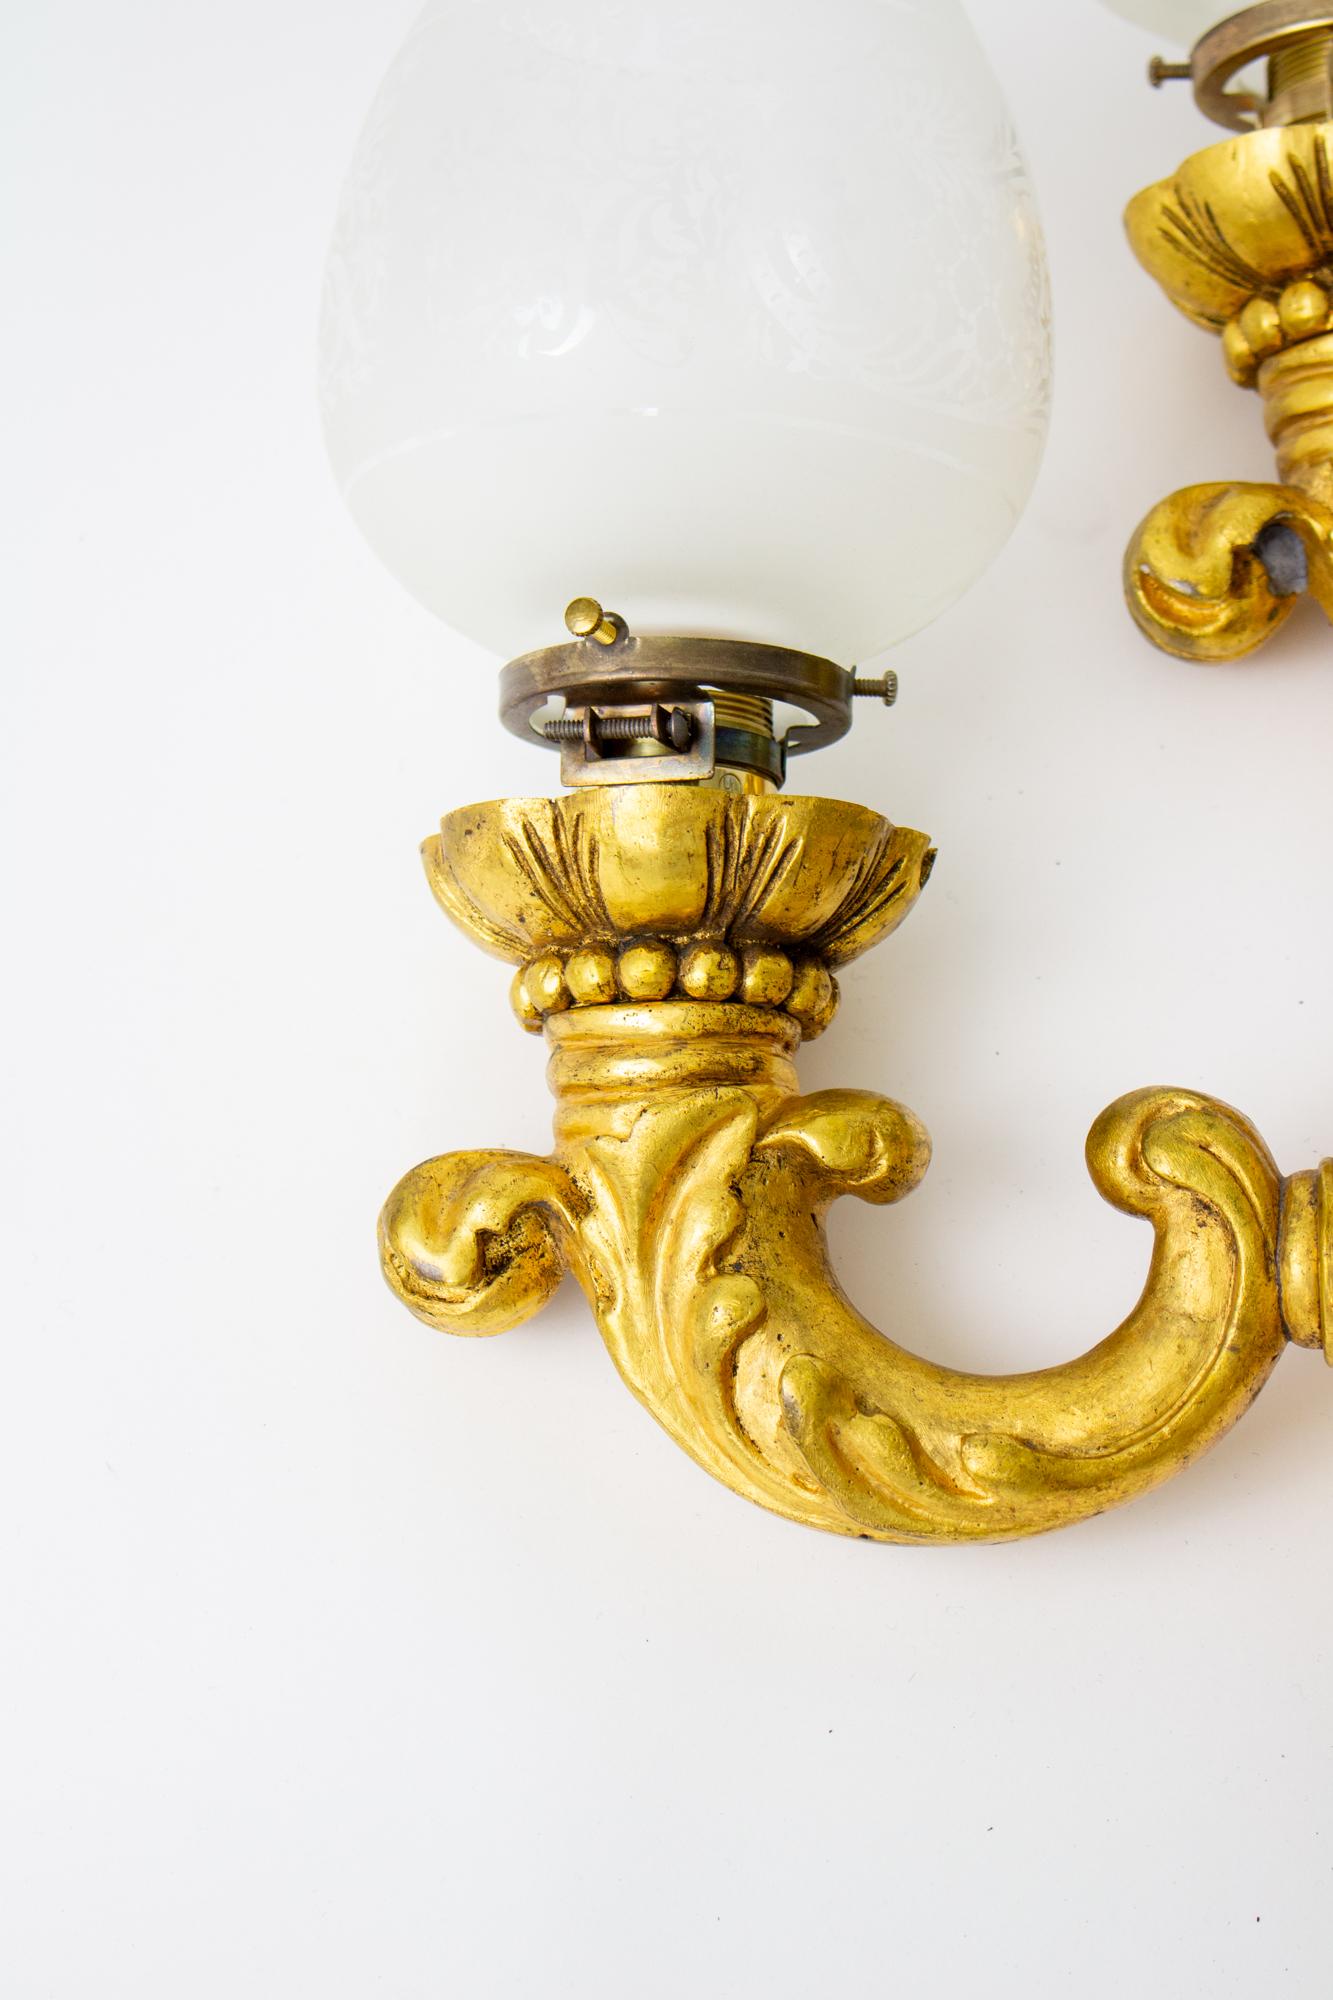 Early 20th Century E.F.Caldwell italianate gilt bronze sconces, a pair. Heavy gilt brass casting with a round backplate. Single upcurved arm with a foliate pattern. Etched glass shade. Original finish is in good condition. Surface cleaned and